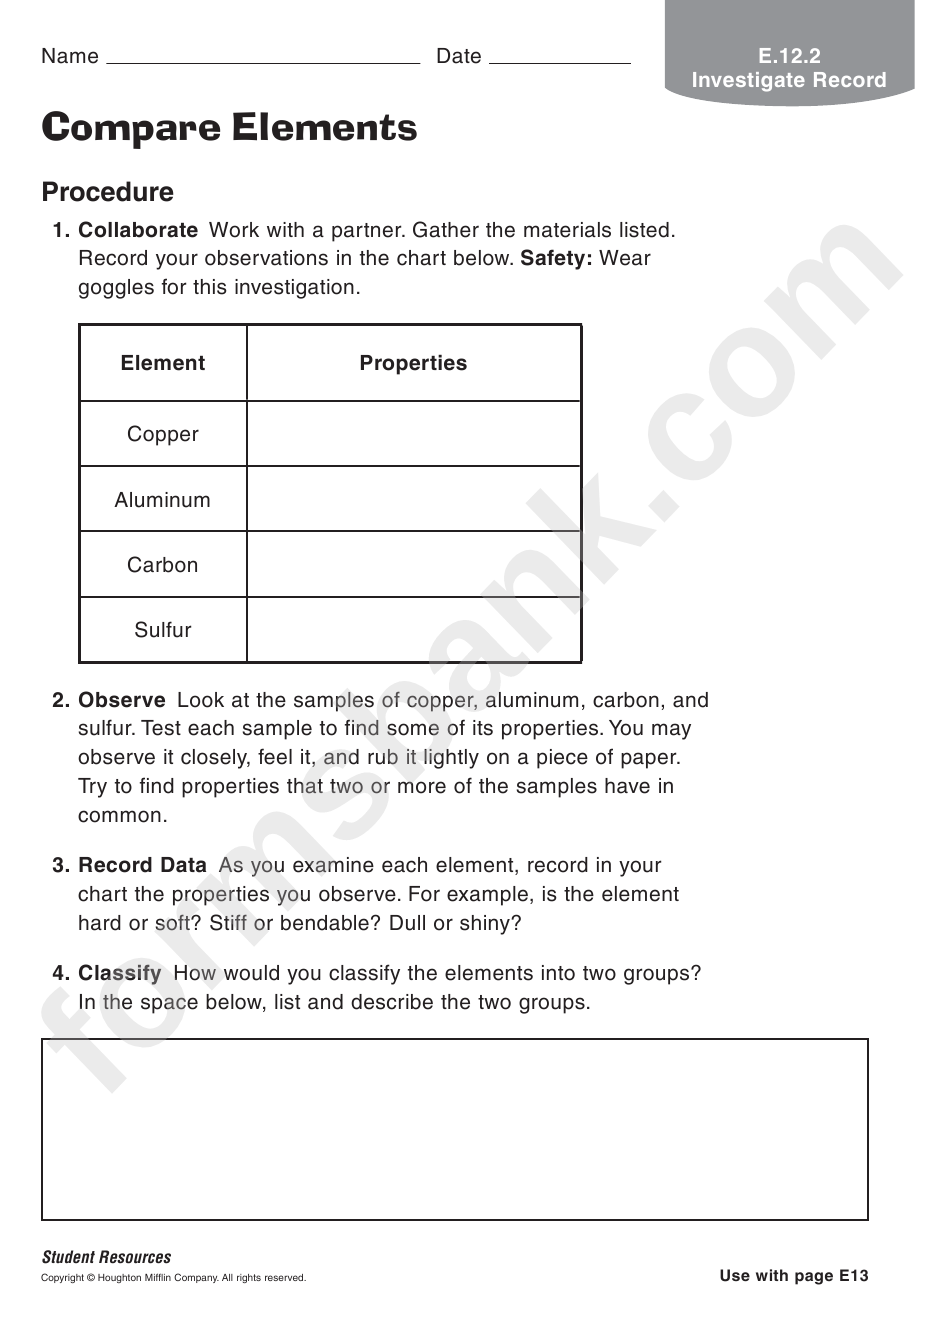 Compare Elements Chemistry Worksheet